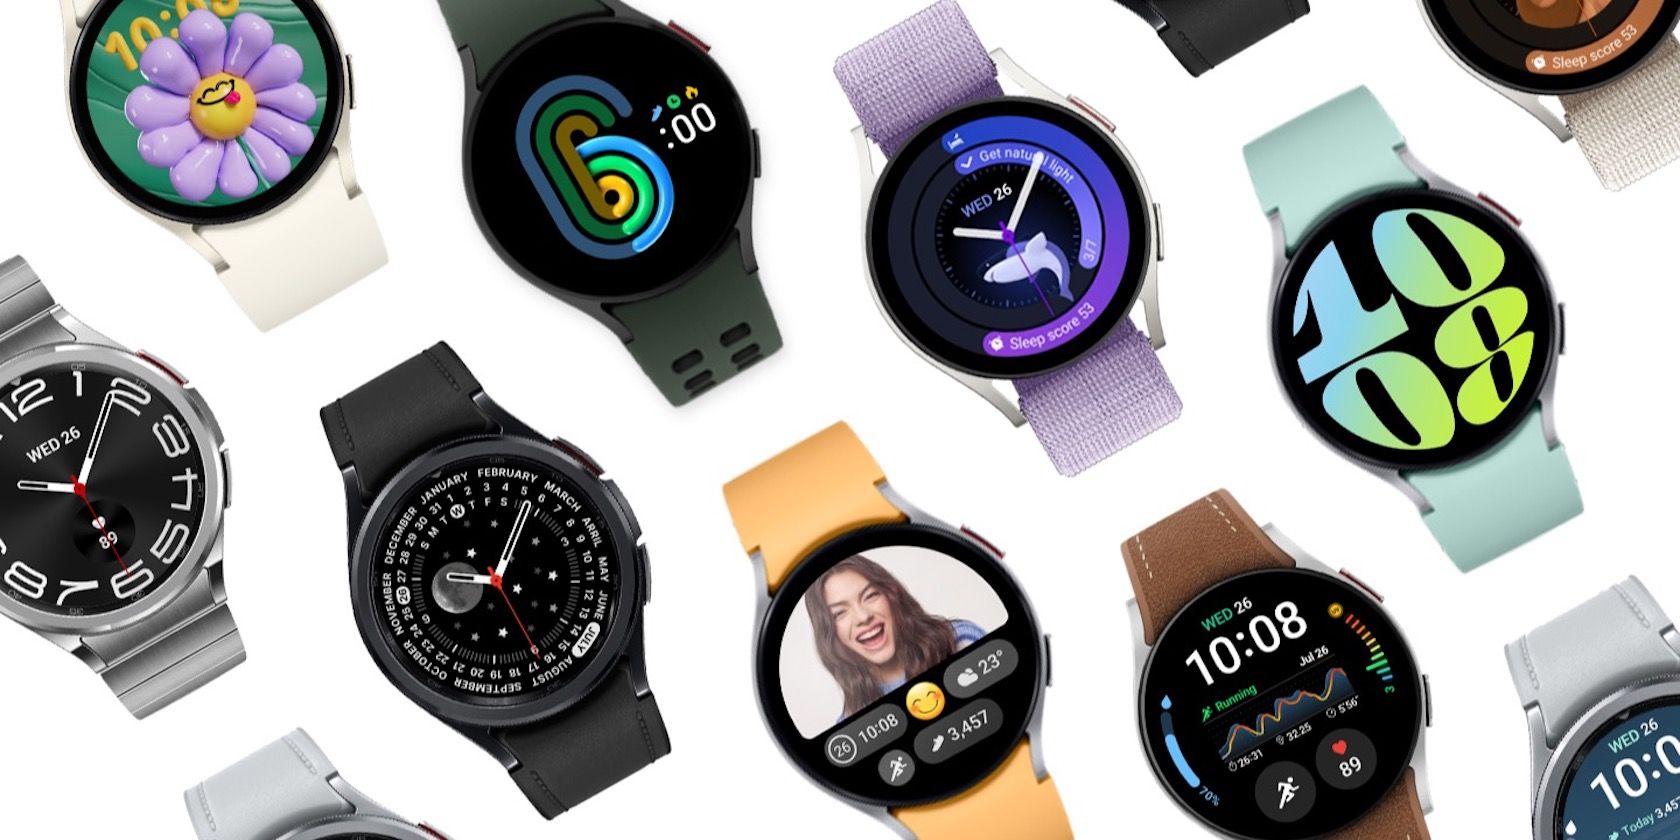 What unique features are available on a smartwatch? - Quora